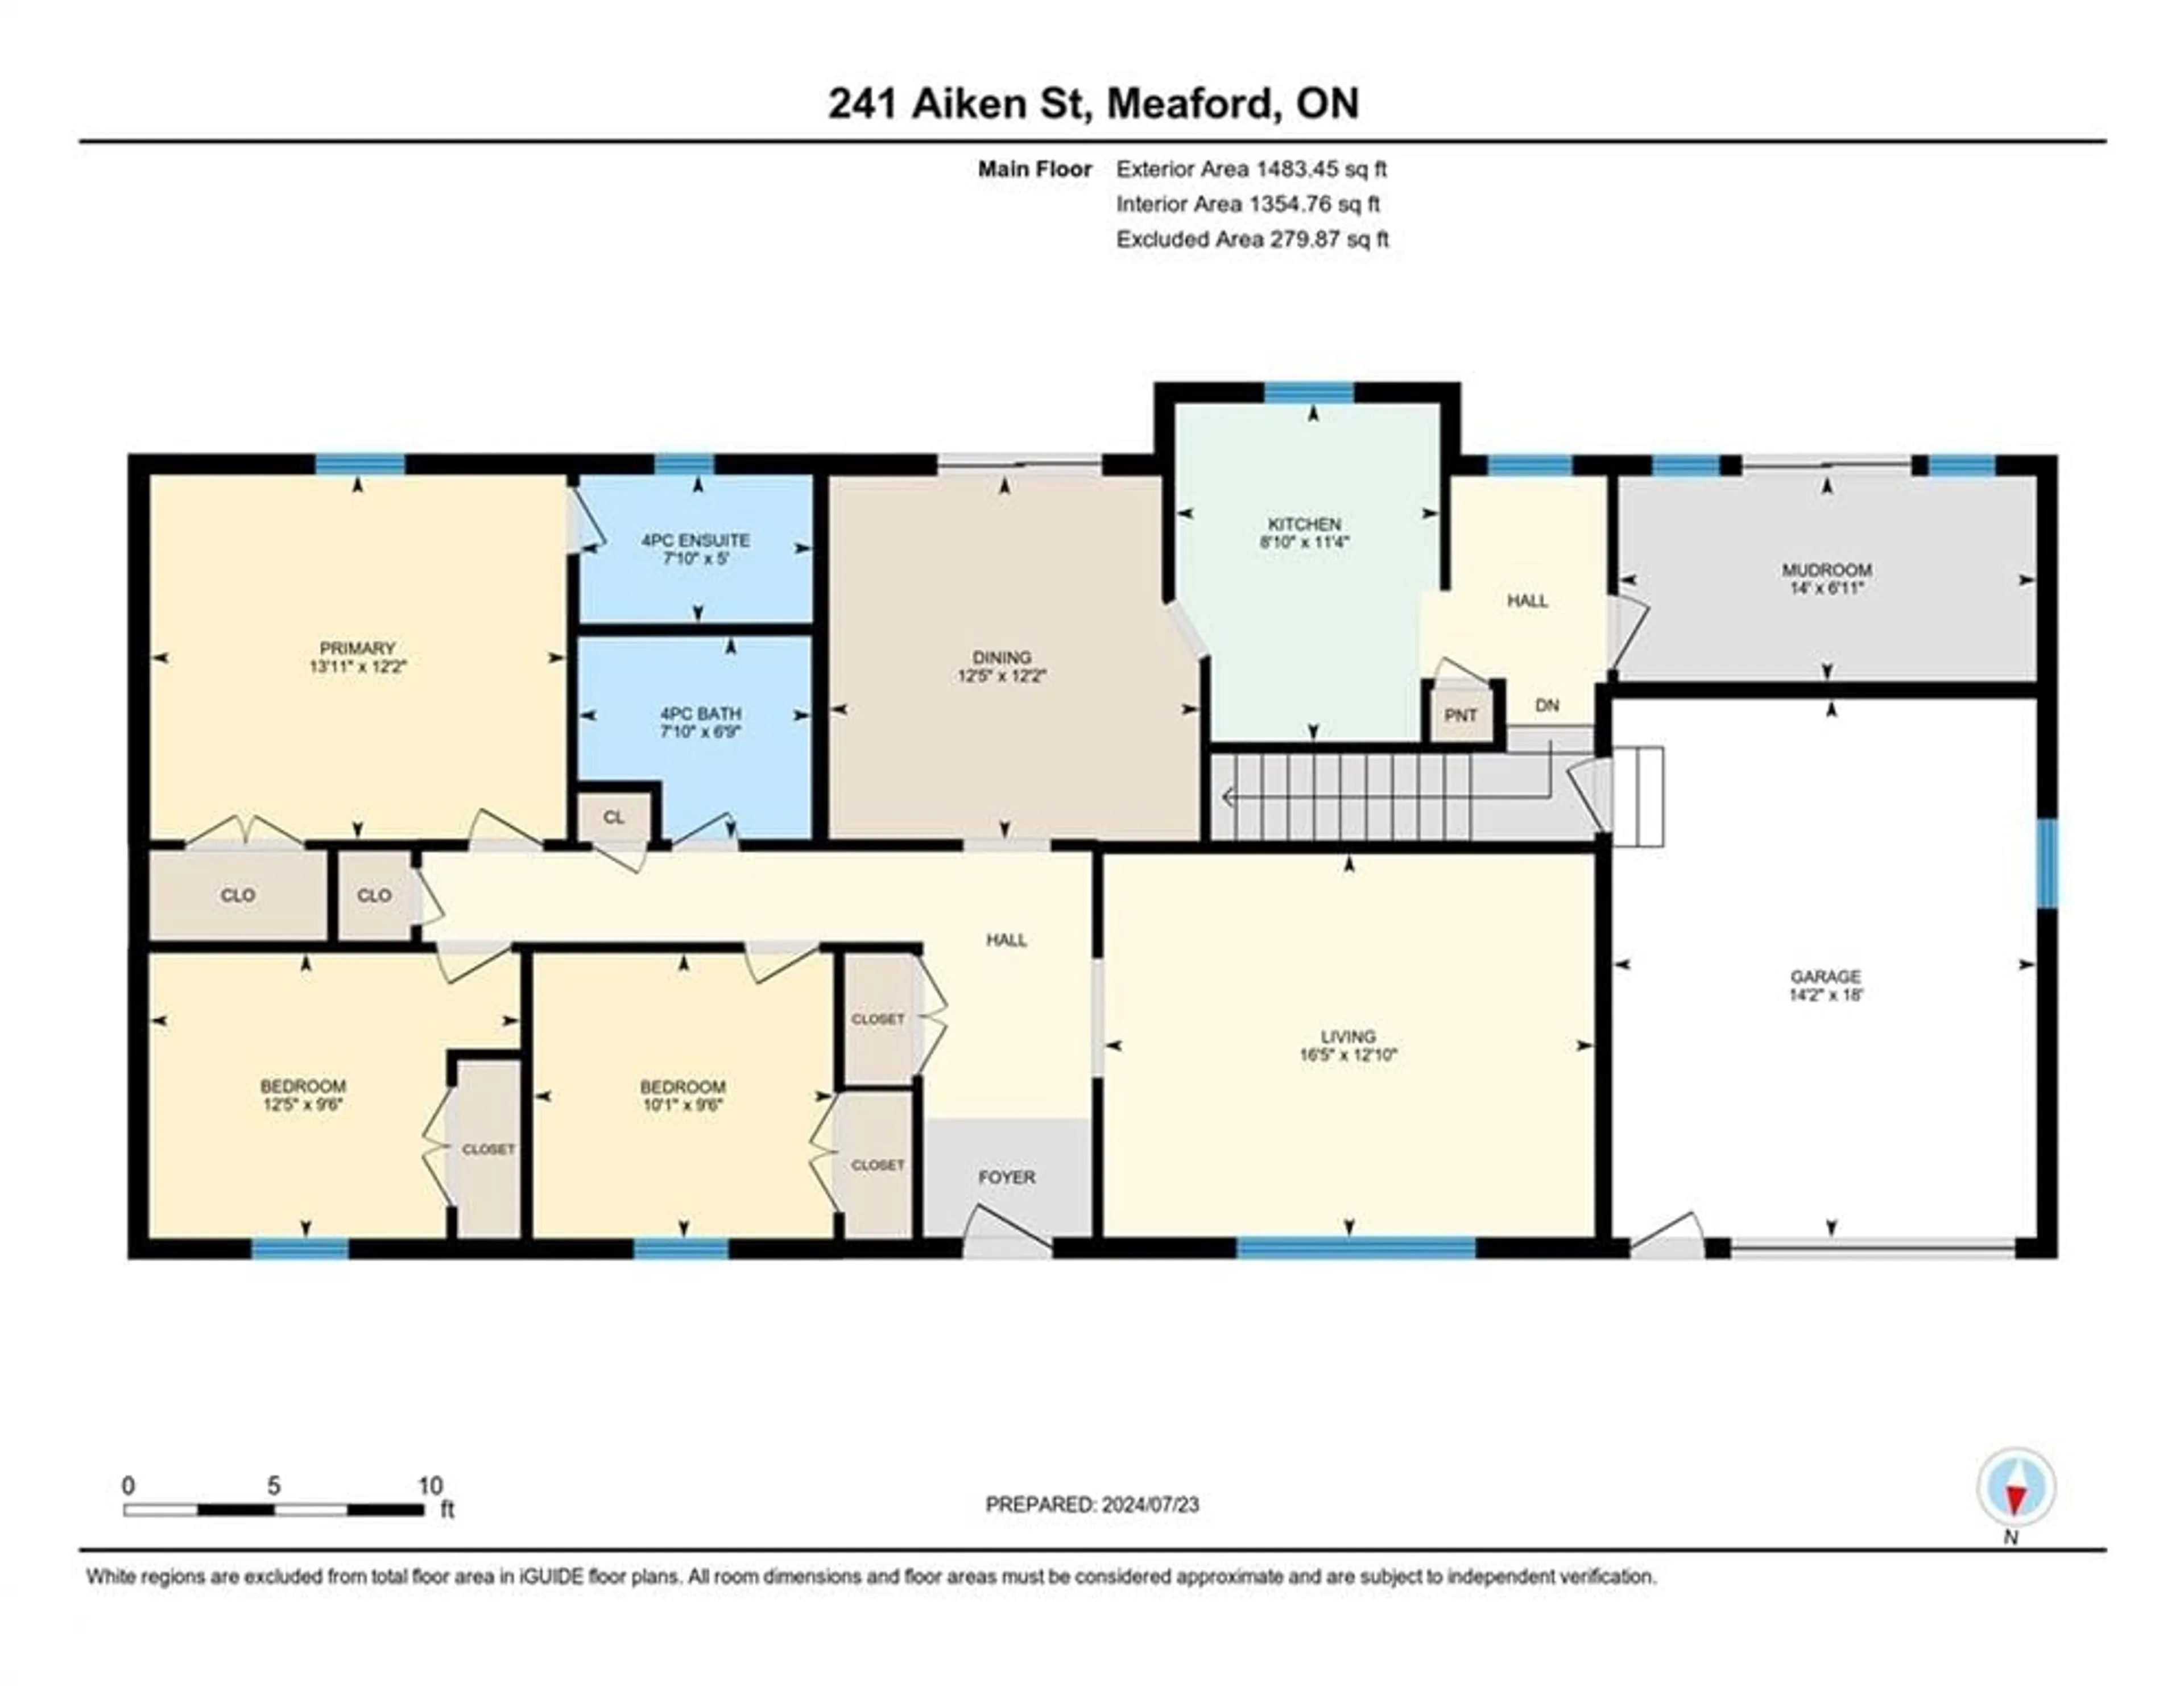 Floor plan for 241 Aiken St, Meaford Ontario N4L 1A9